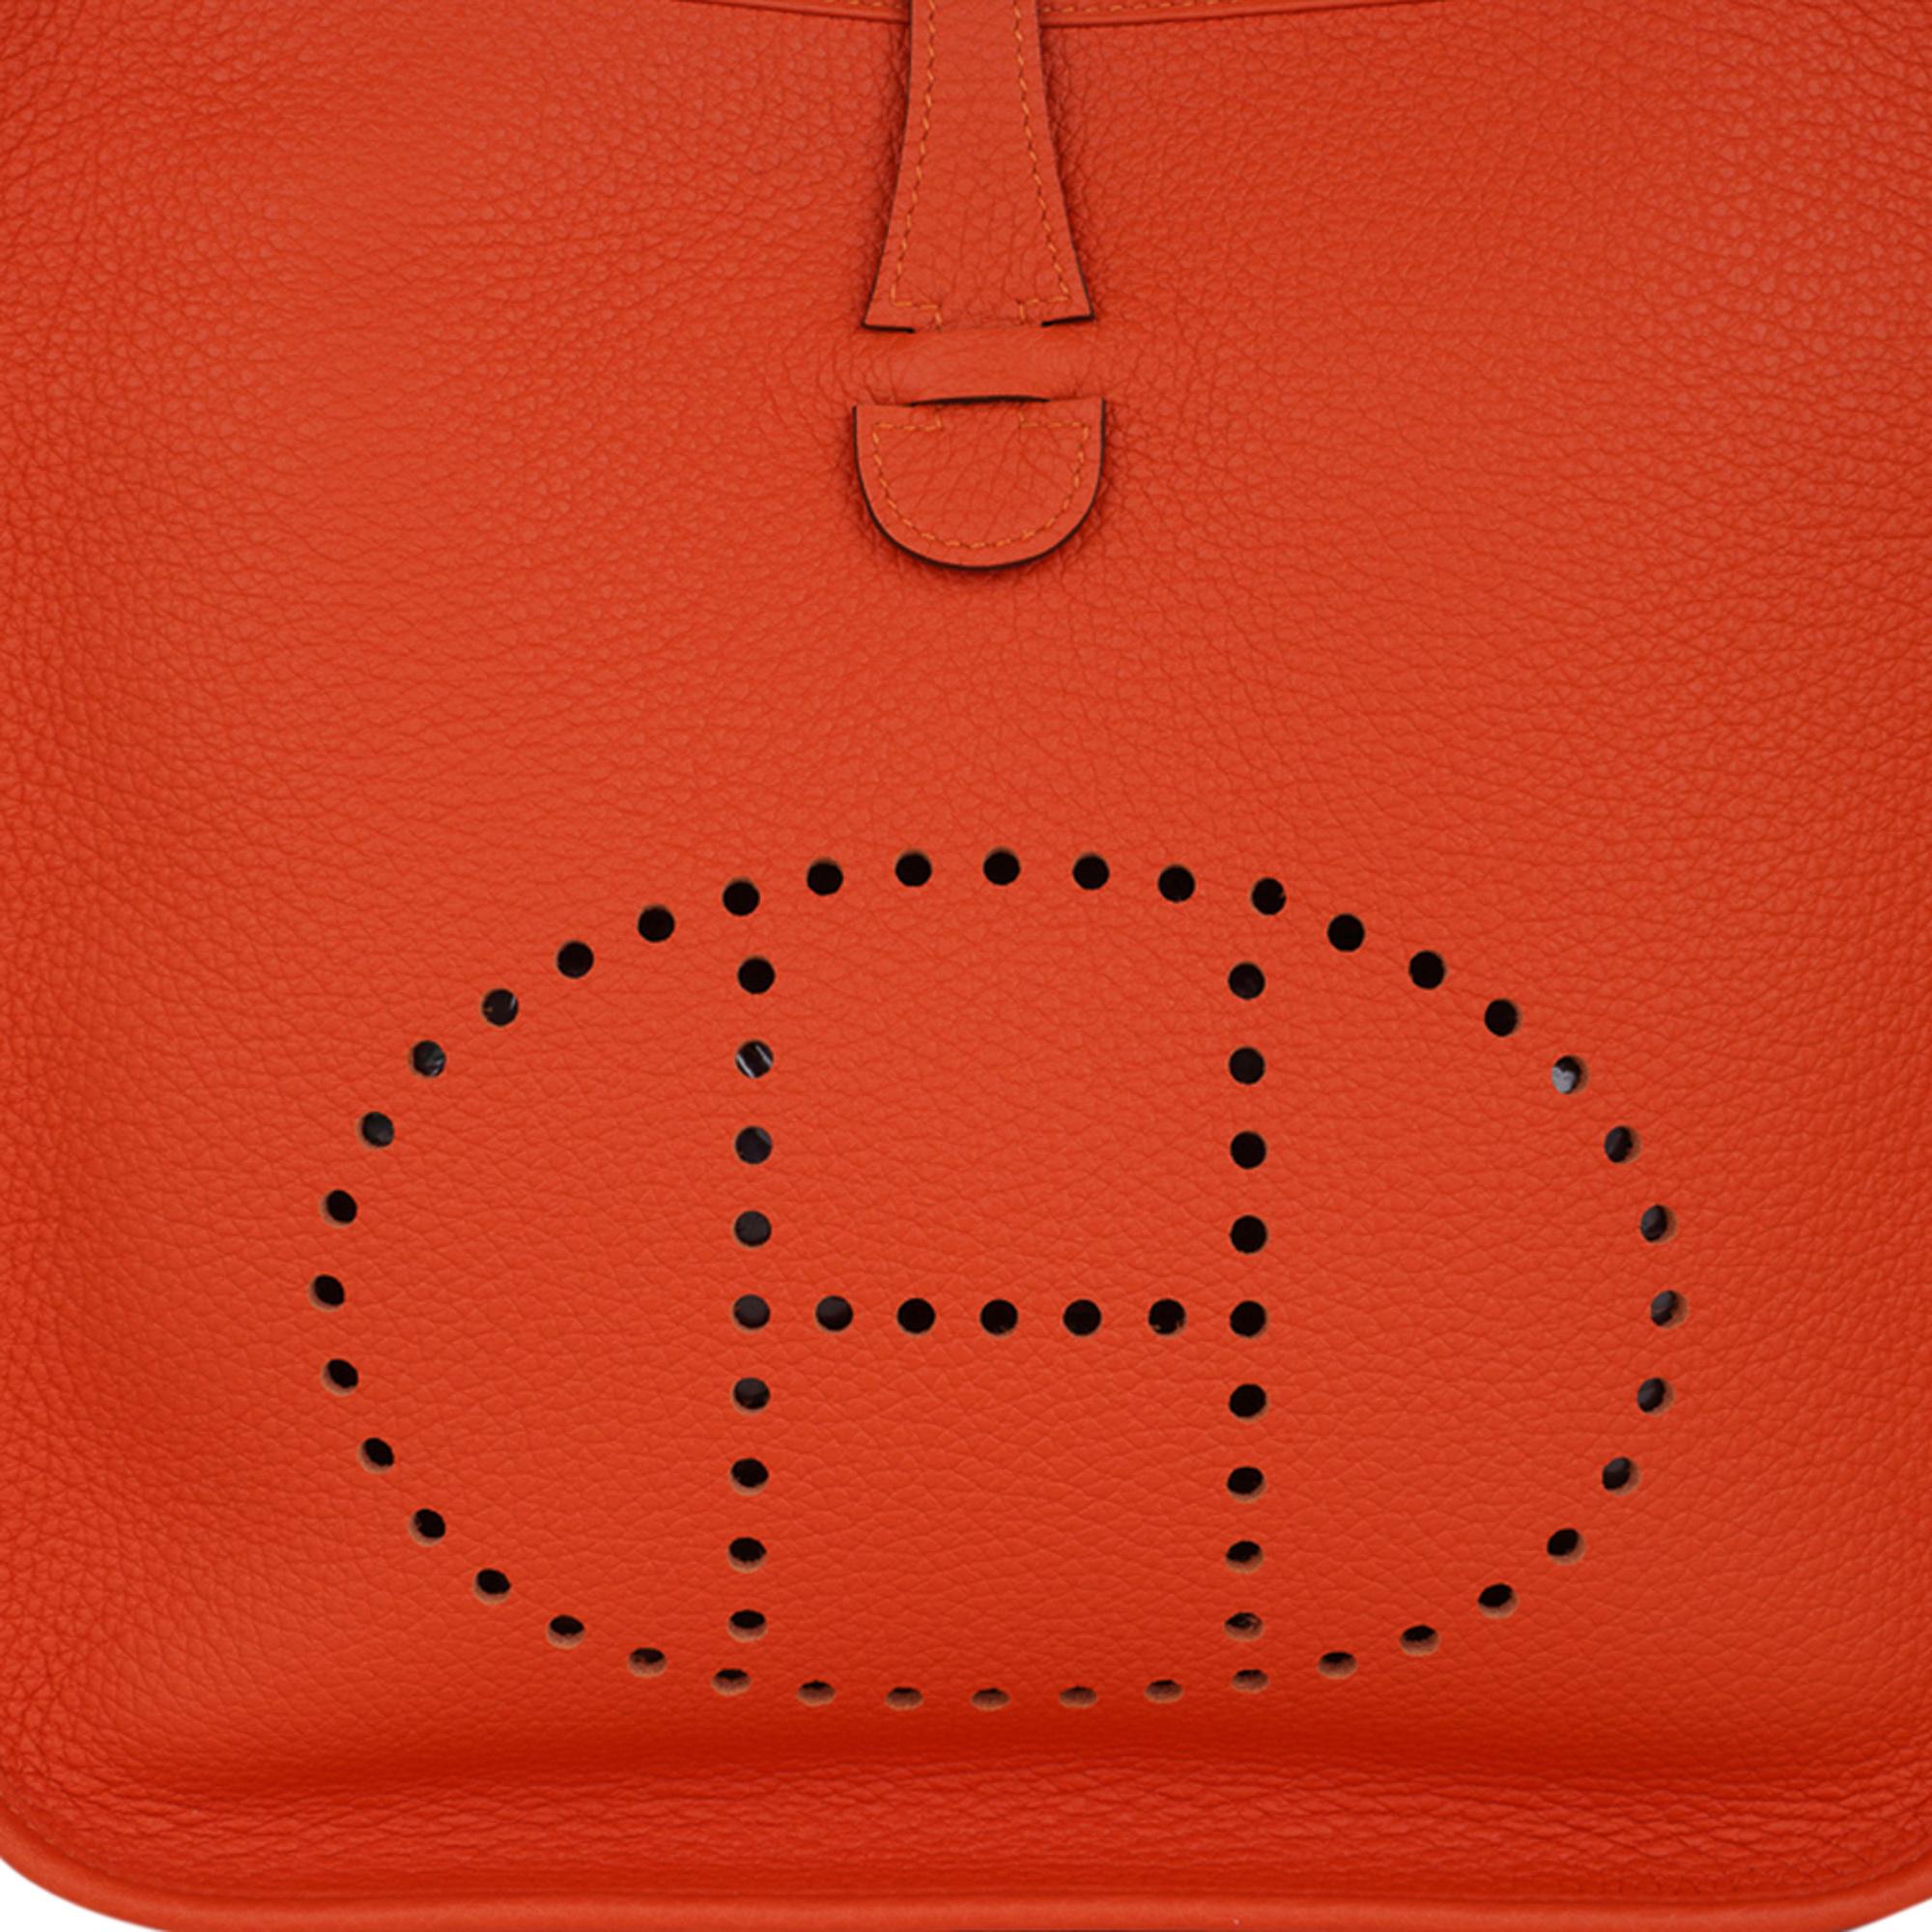 Mightychic offers an Hermes Evelyne PM featured in Feu Orange.
Beautiful with gold hardware.
Plush clemence leather.
Fabulous shoulder or cross body bag with roomy interior and rear outside deep pocket.
Signature perforated H on front of bag.
Comes